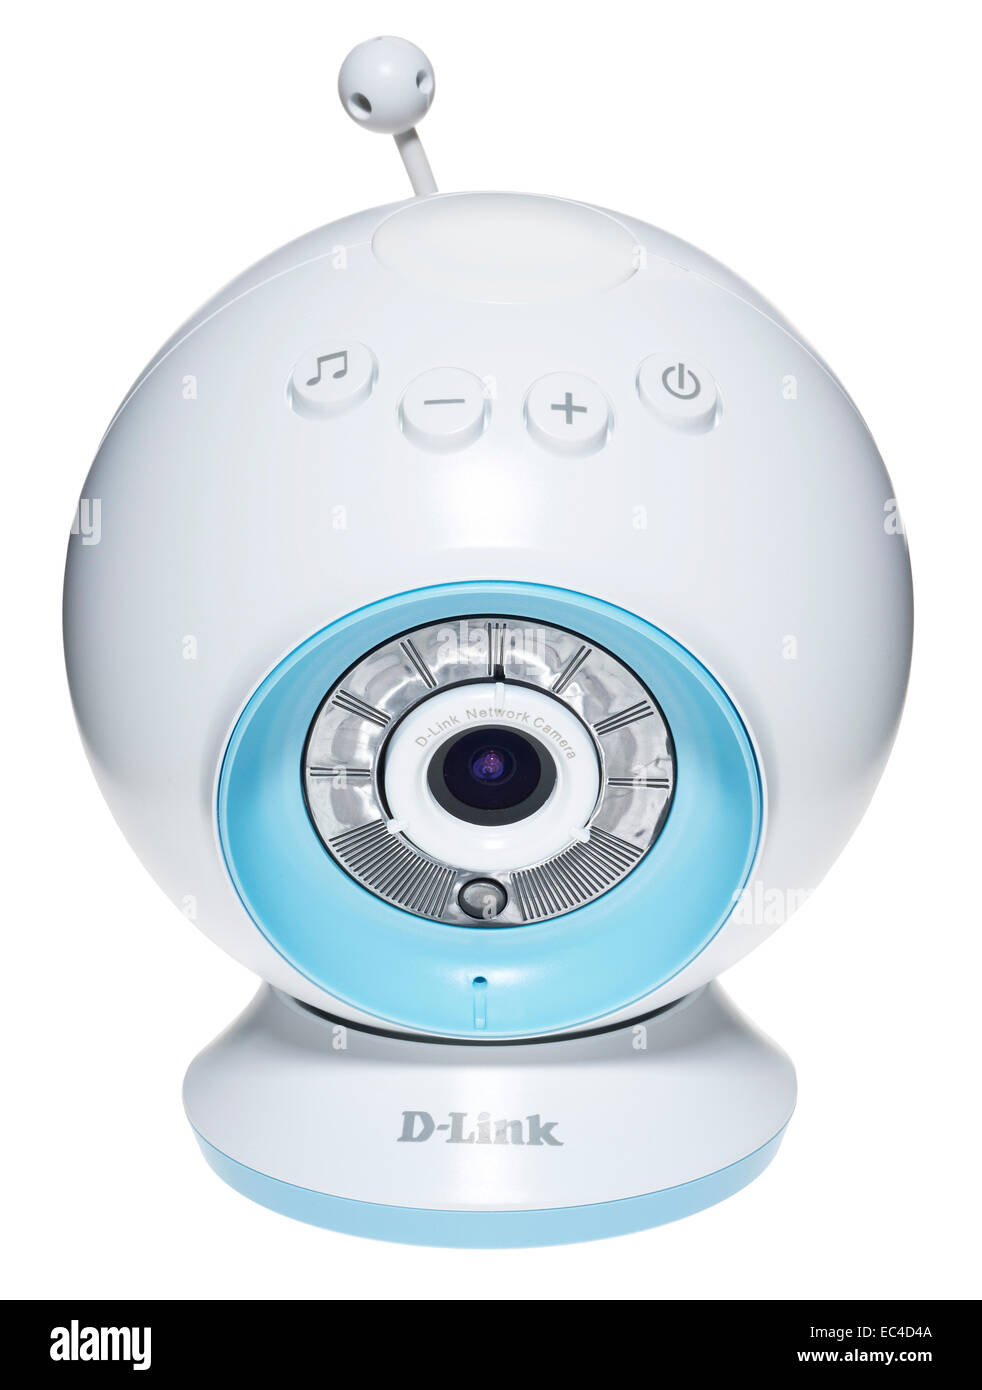 D Link baby monitor, video camera. Baby webcam. Wireless internet child monitor. Stock Photo